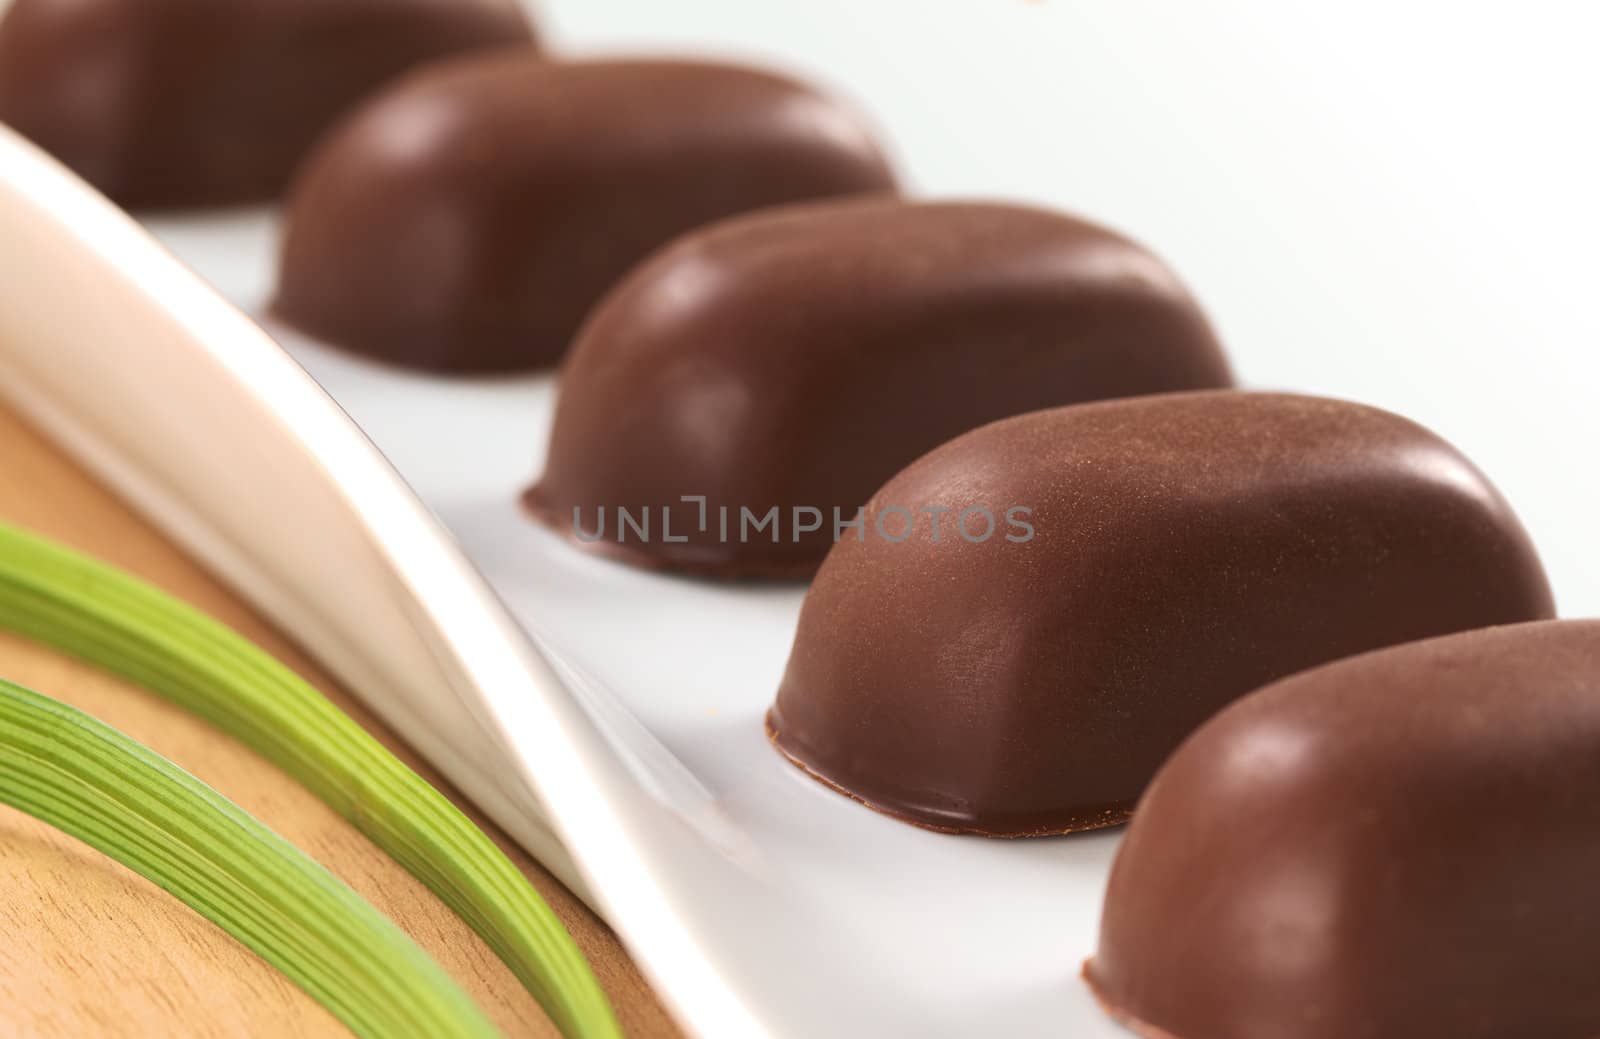 Chocolate candies filled with pecan nut arranged on a long white plate  (Very Shallow Depth of Field, Focus on the front of the second candy)